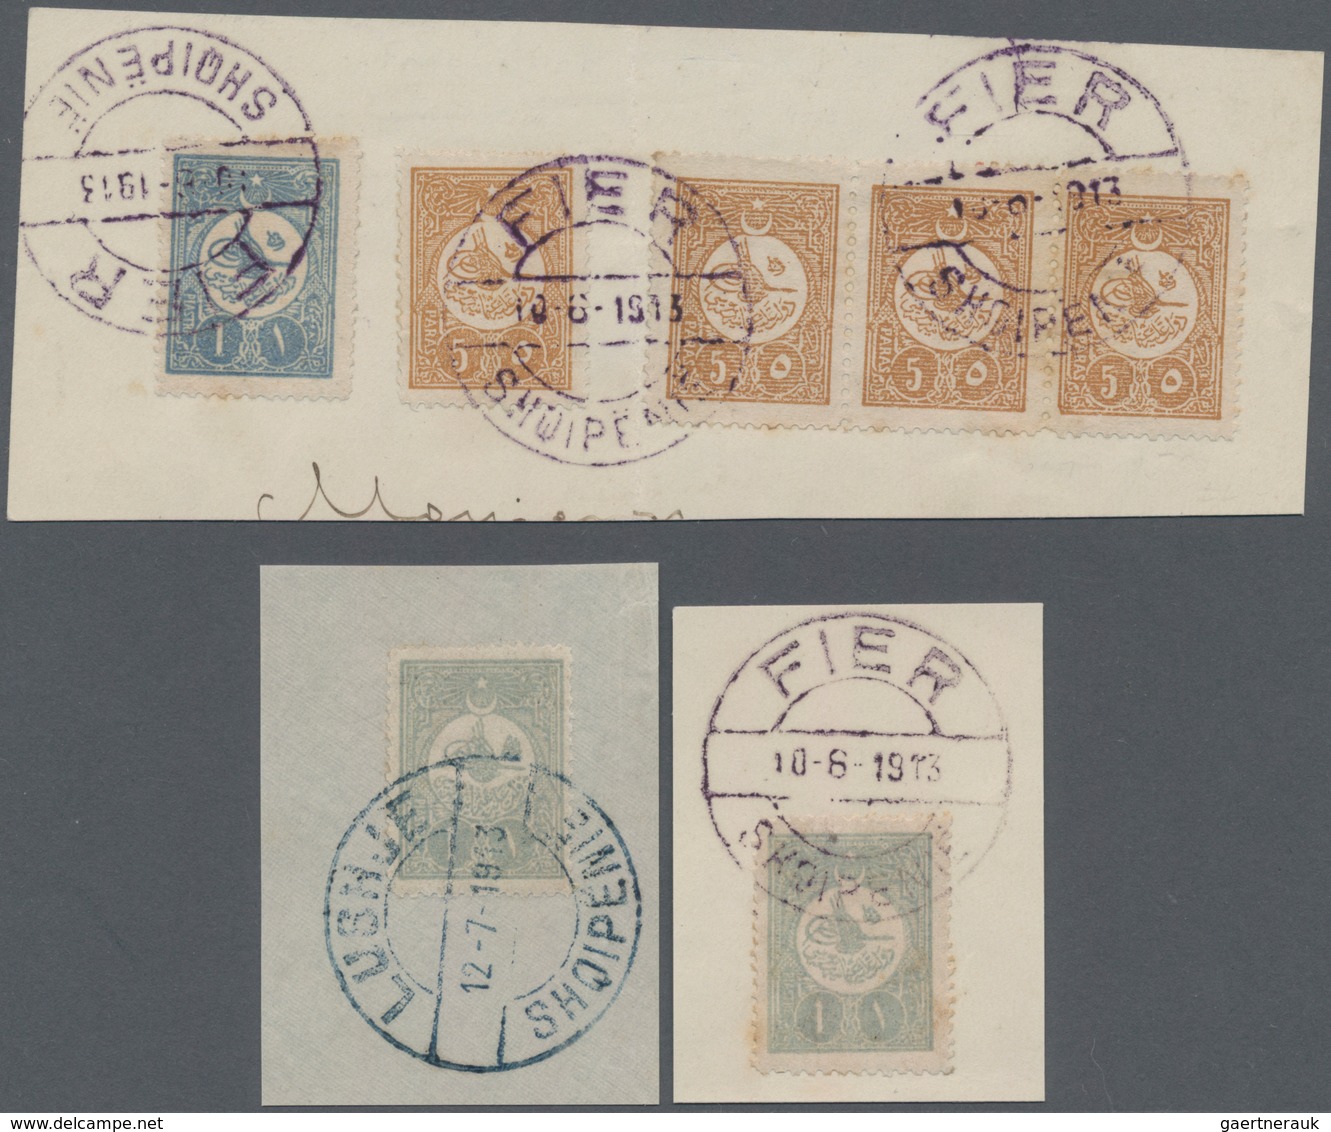 Albanien - Stempel: 1913, SHQIPENIE Type Postmarks Used On Ottoman Empire Stamps: Attractive Group C - Albanië